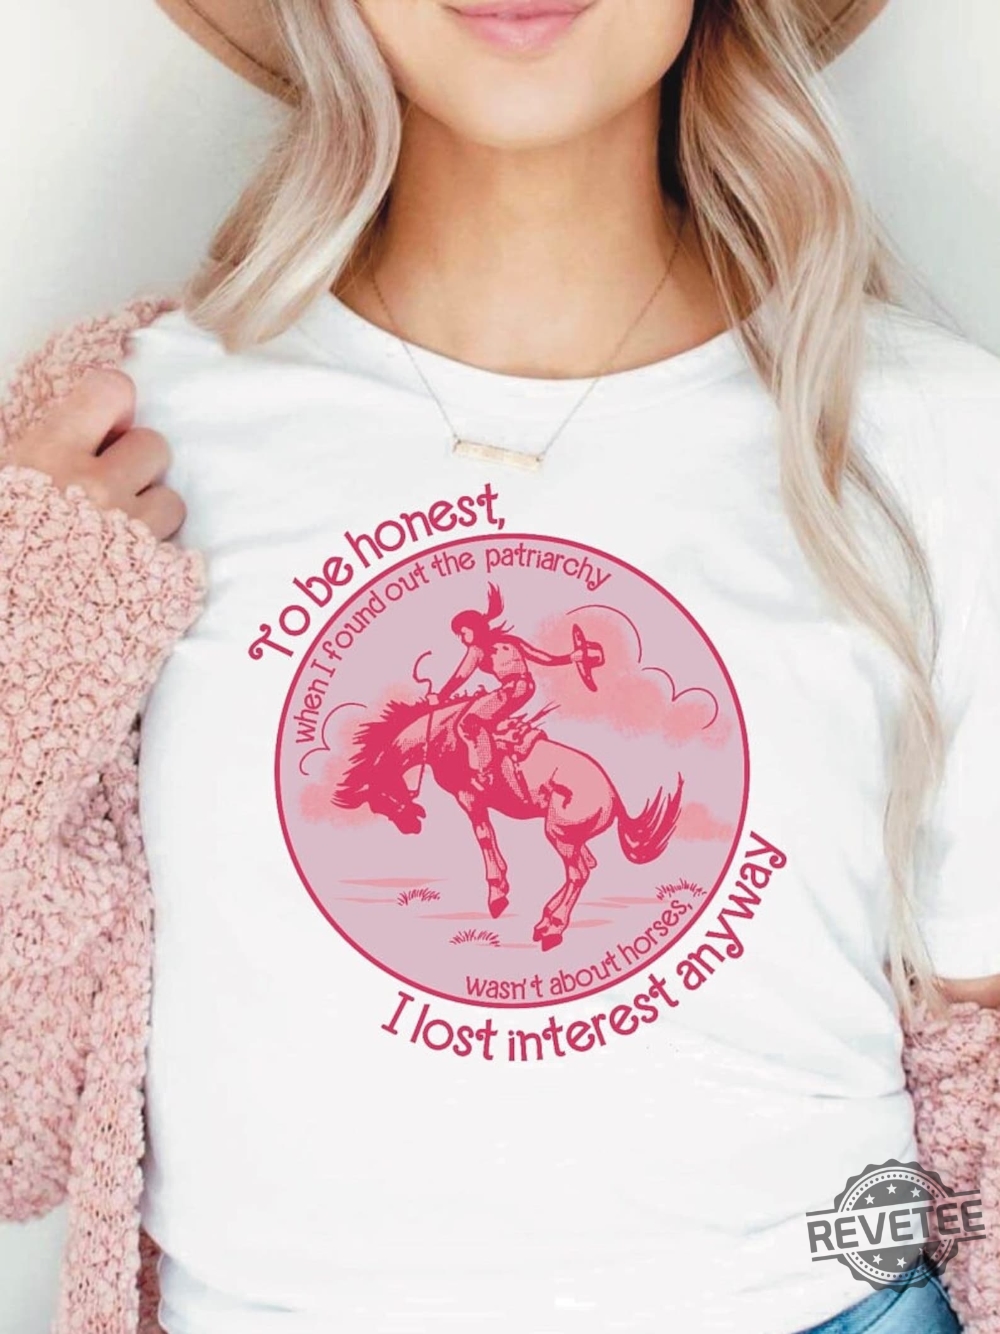 Barbie Patriarchy Horse Shirt Patriarchy Wasnt About Horses I Lost Interest Ken Patriarchy Horses Quote Mojo Dojo Casa House I Lost Interest In The Patriarchy Ken Patriarchy Horses Shirt New